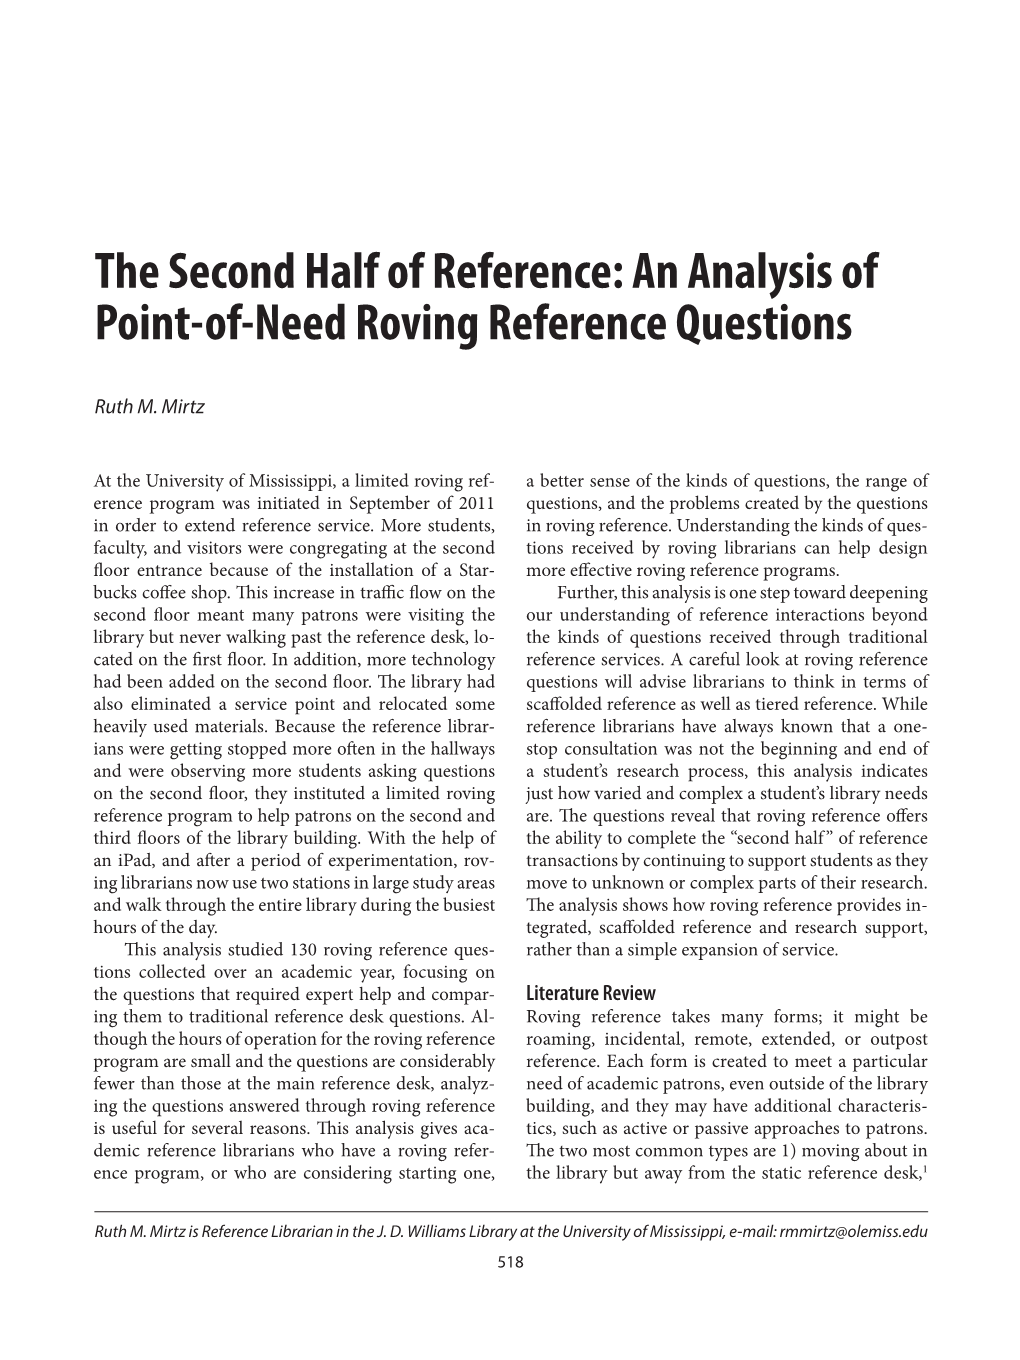 The Second Half of Reference: an Analysis of Point-Of-Need Roving Reference Questions